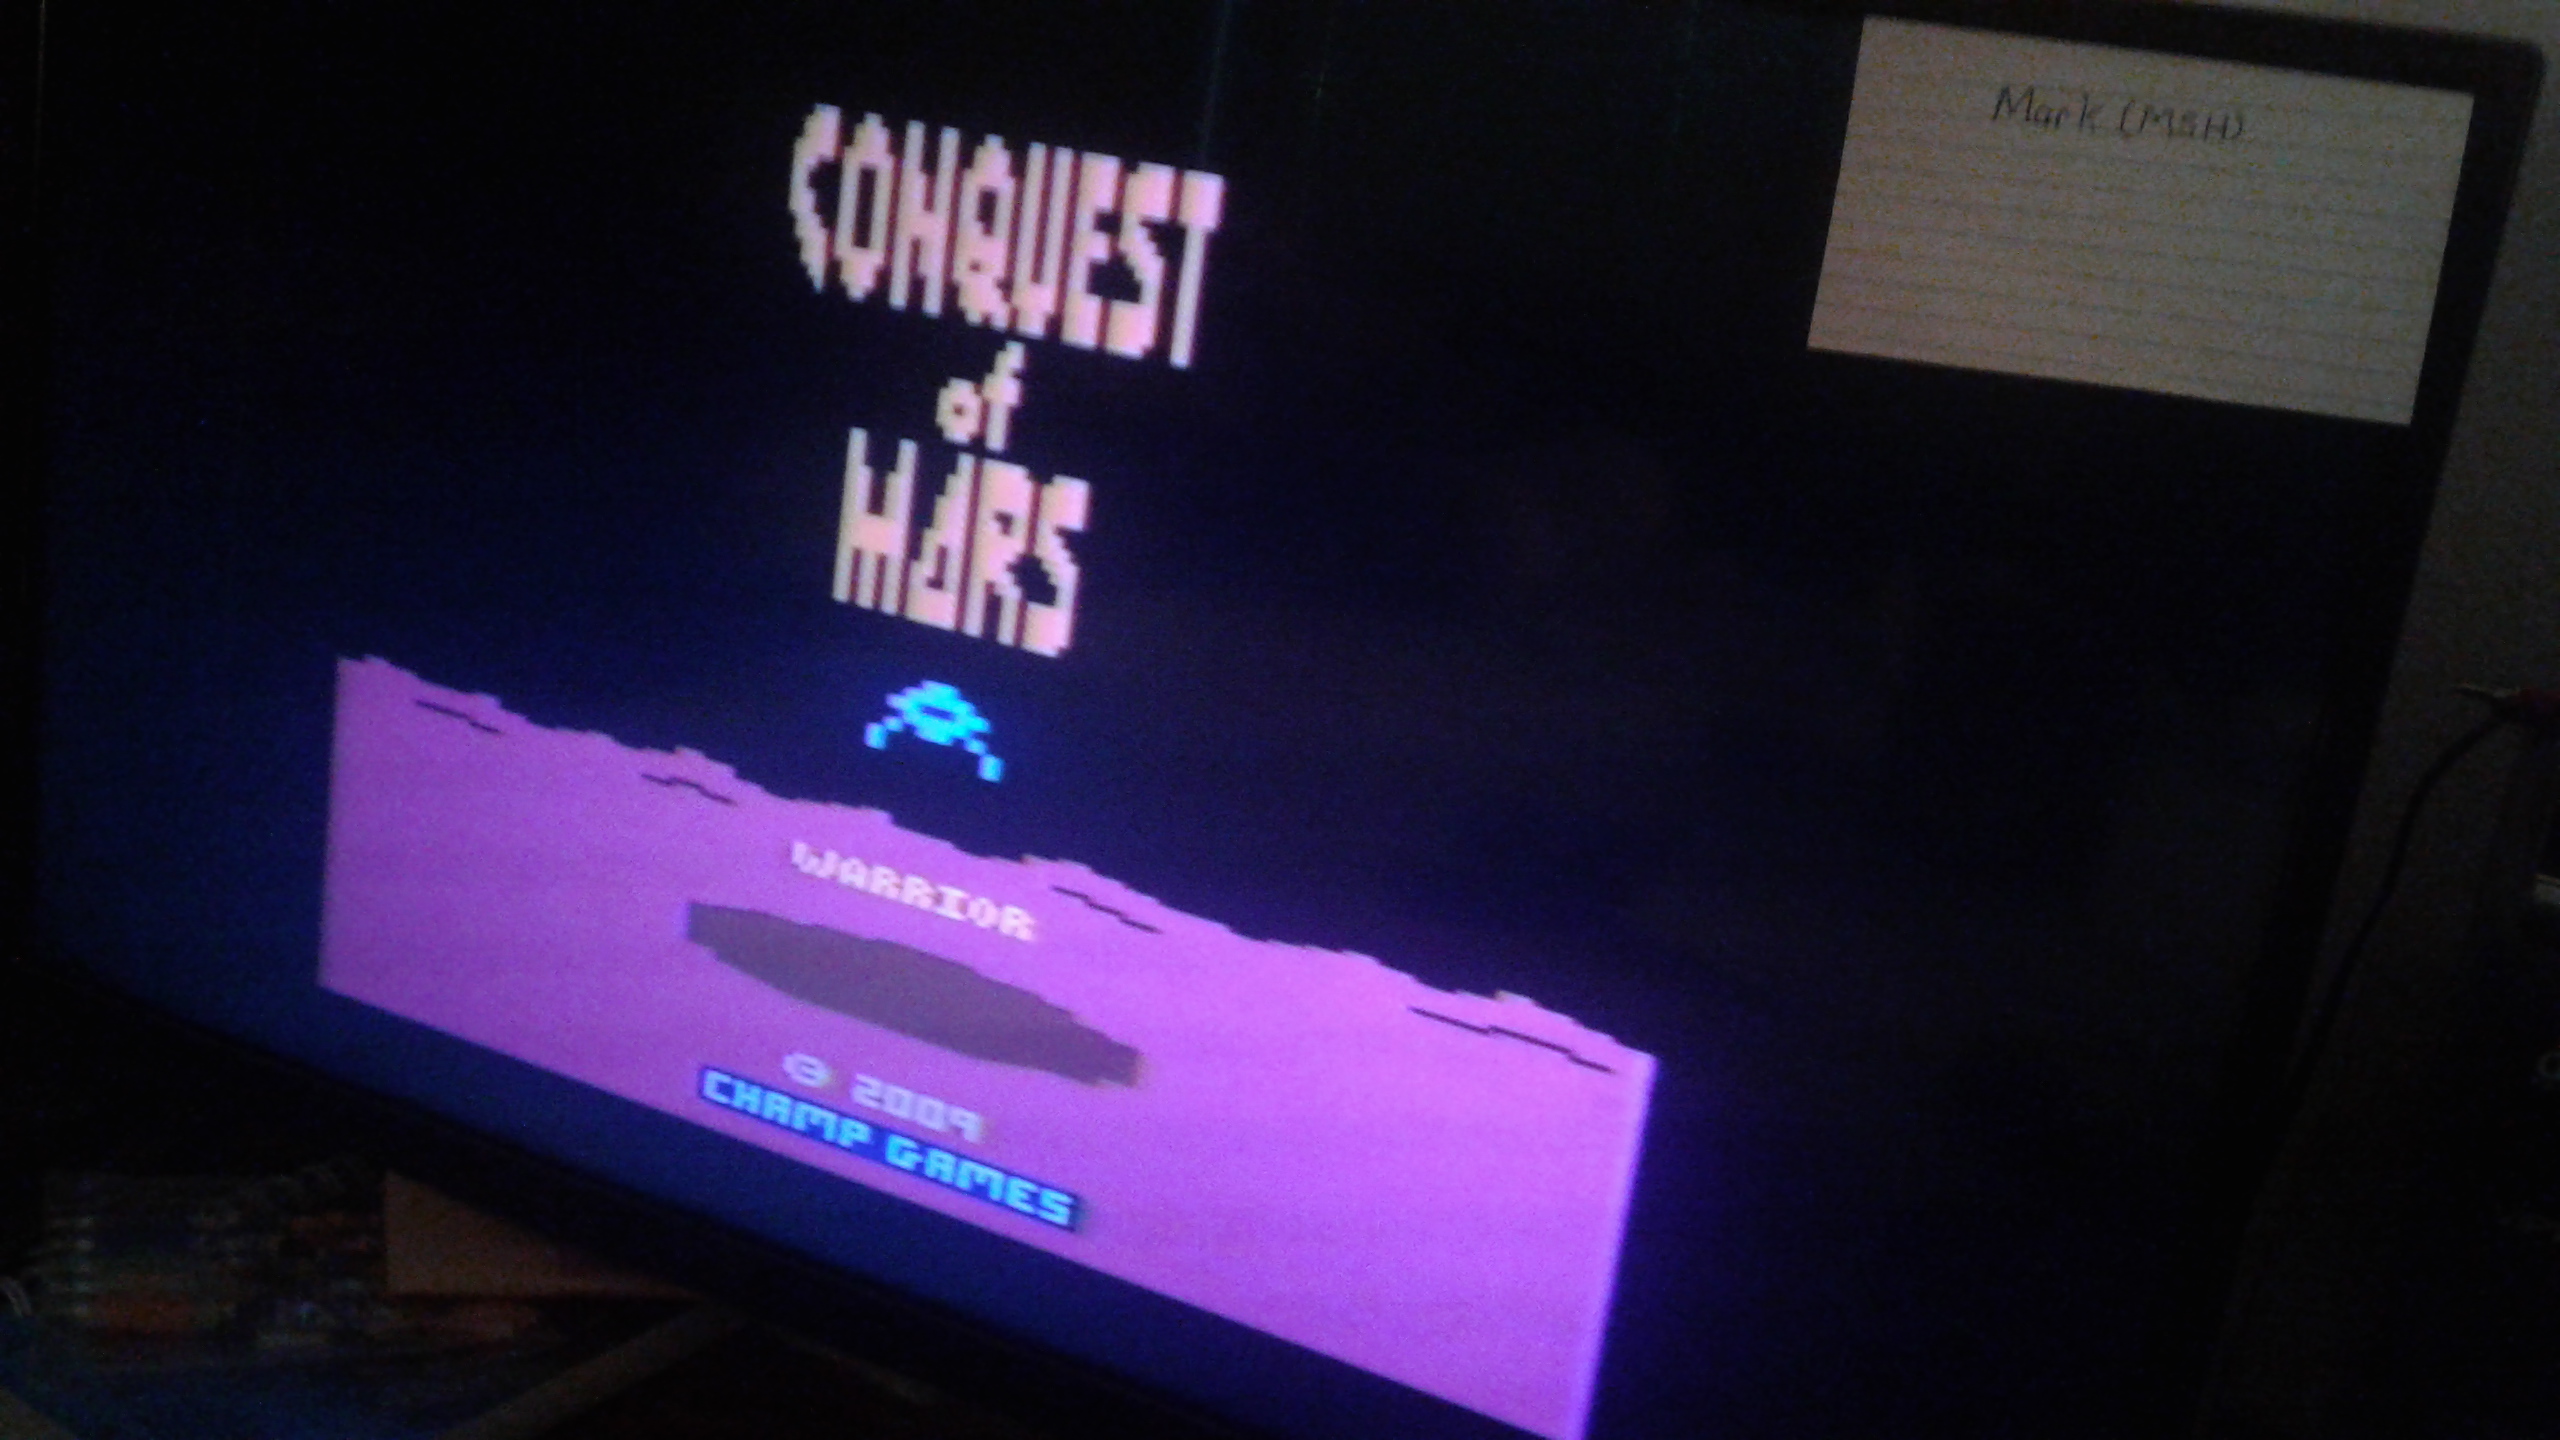 Mark: Conquest of Mars: Warrior (Atari 2600 Expert/A) 10,560 points on 2019-03-06 01:10:39